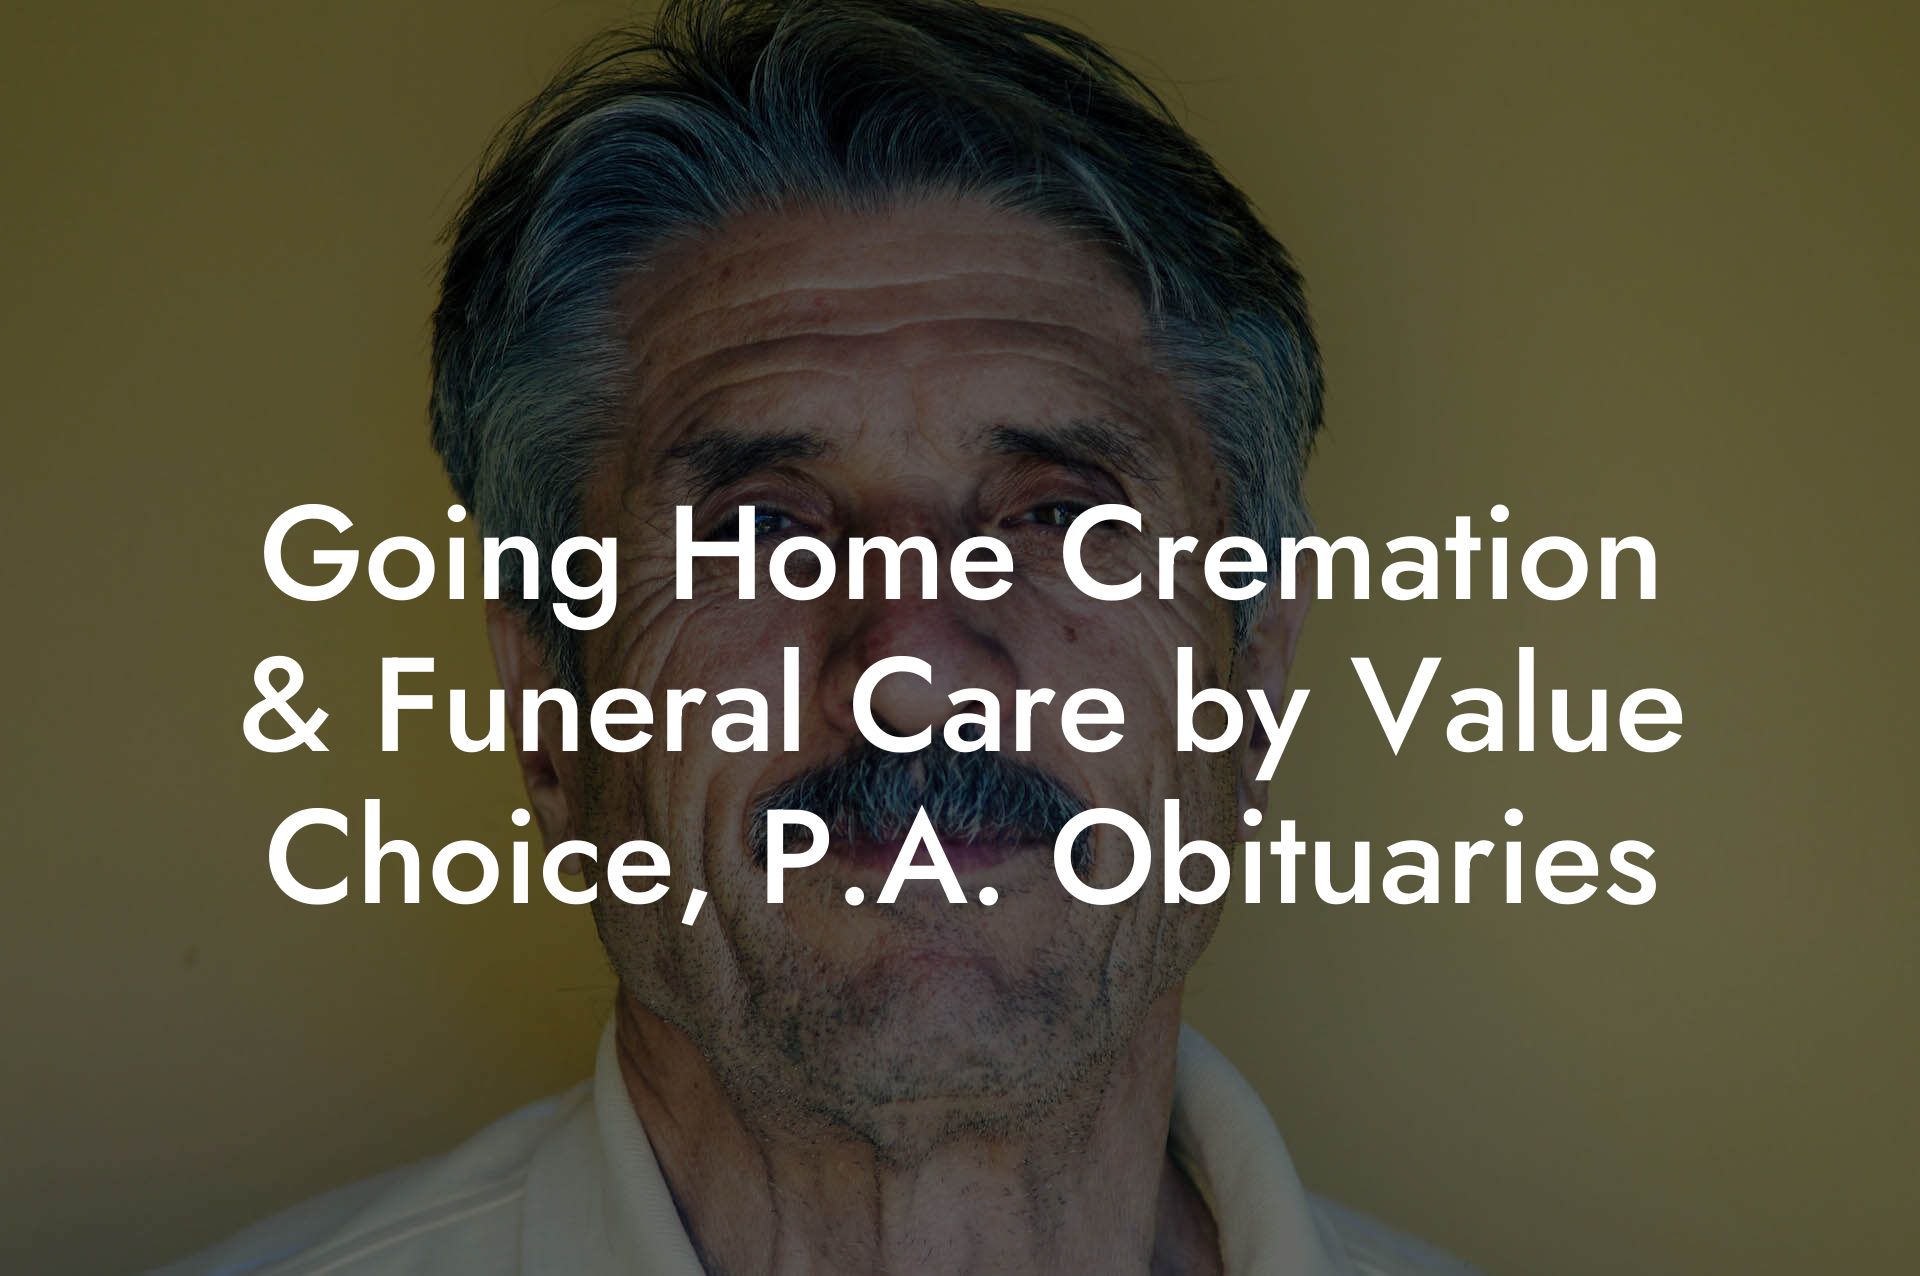 Going Home Cremation & Funeral Care by Value Choice, P.A. Obituaries